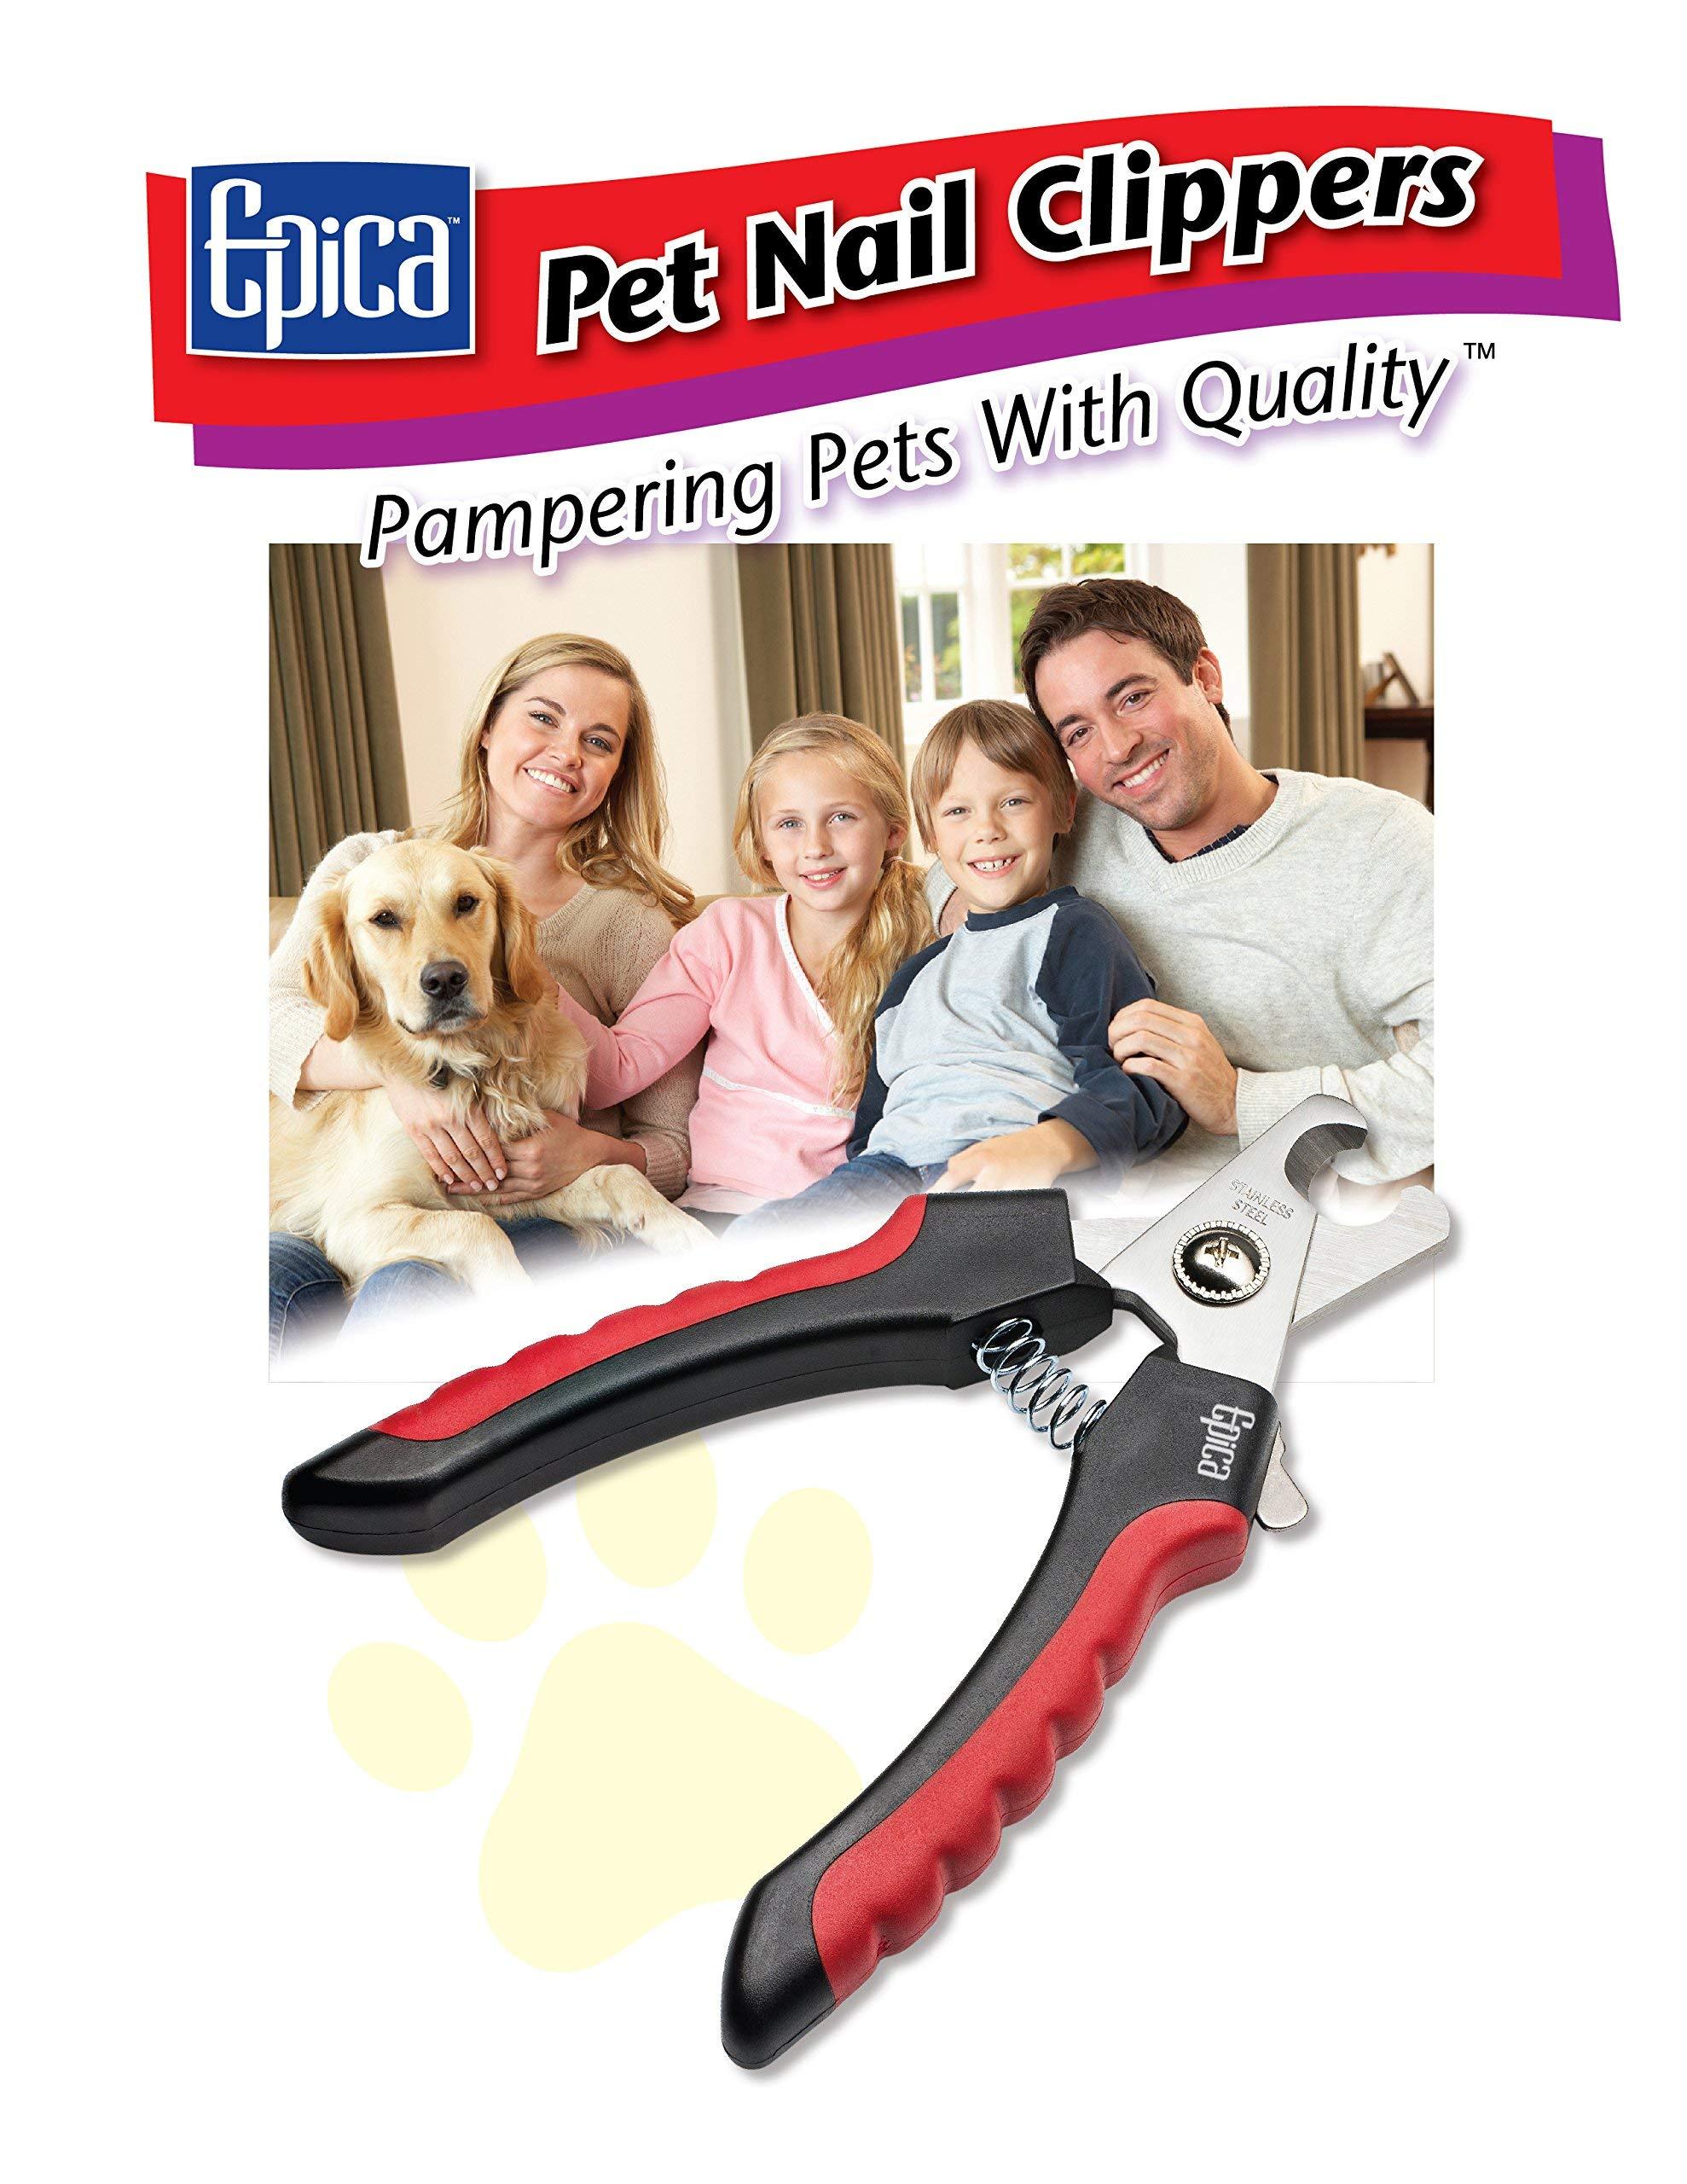 Best Professional Pet Nail Clipper Large - image 4 of 5